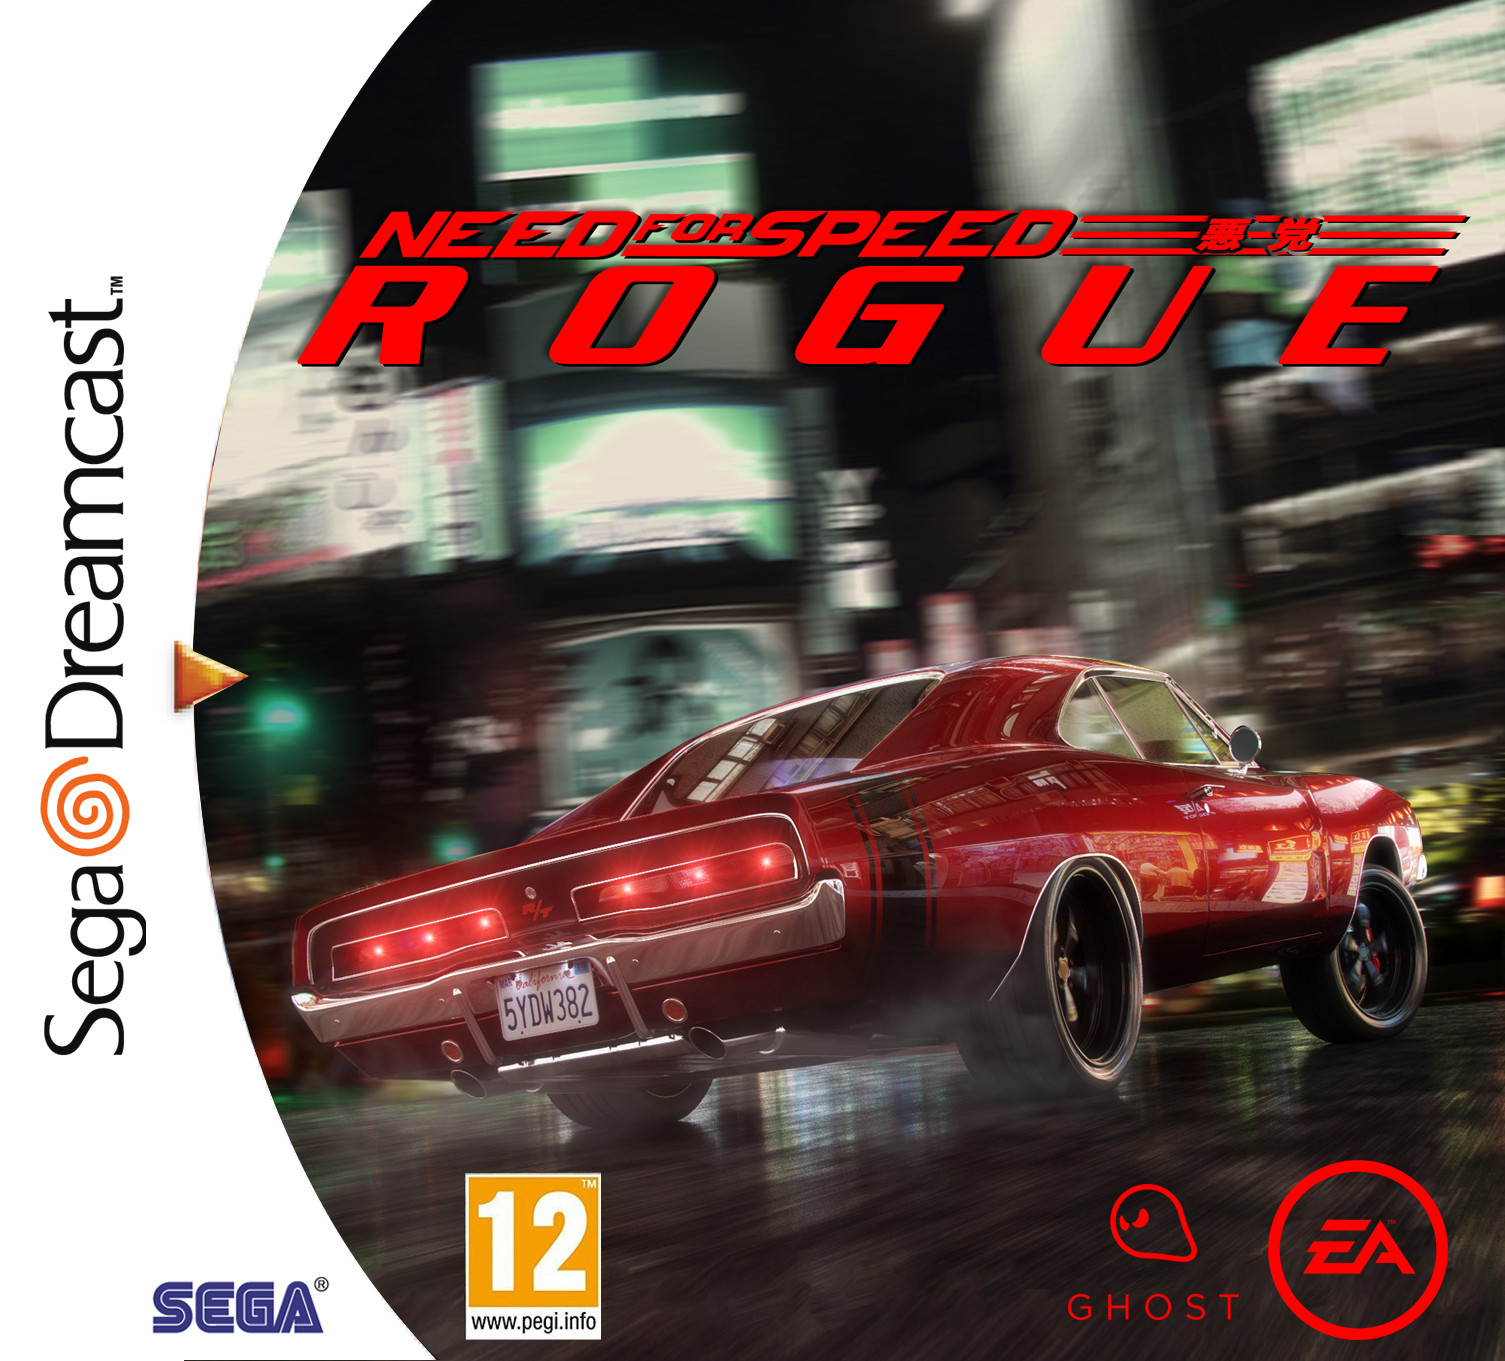 Need for Speed Rogue (Sega Dreamcast Cover)